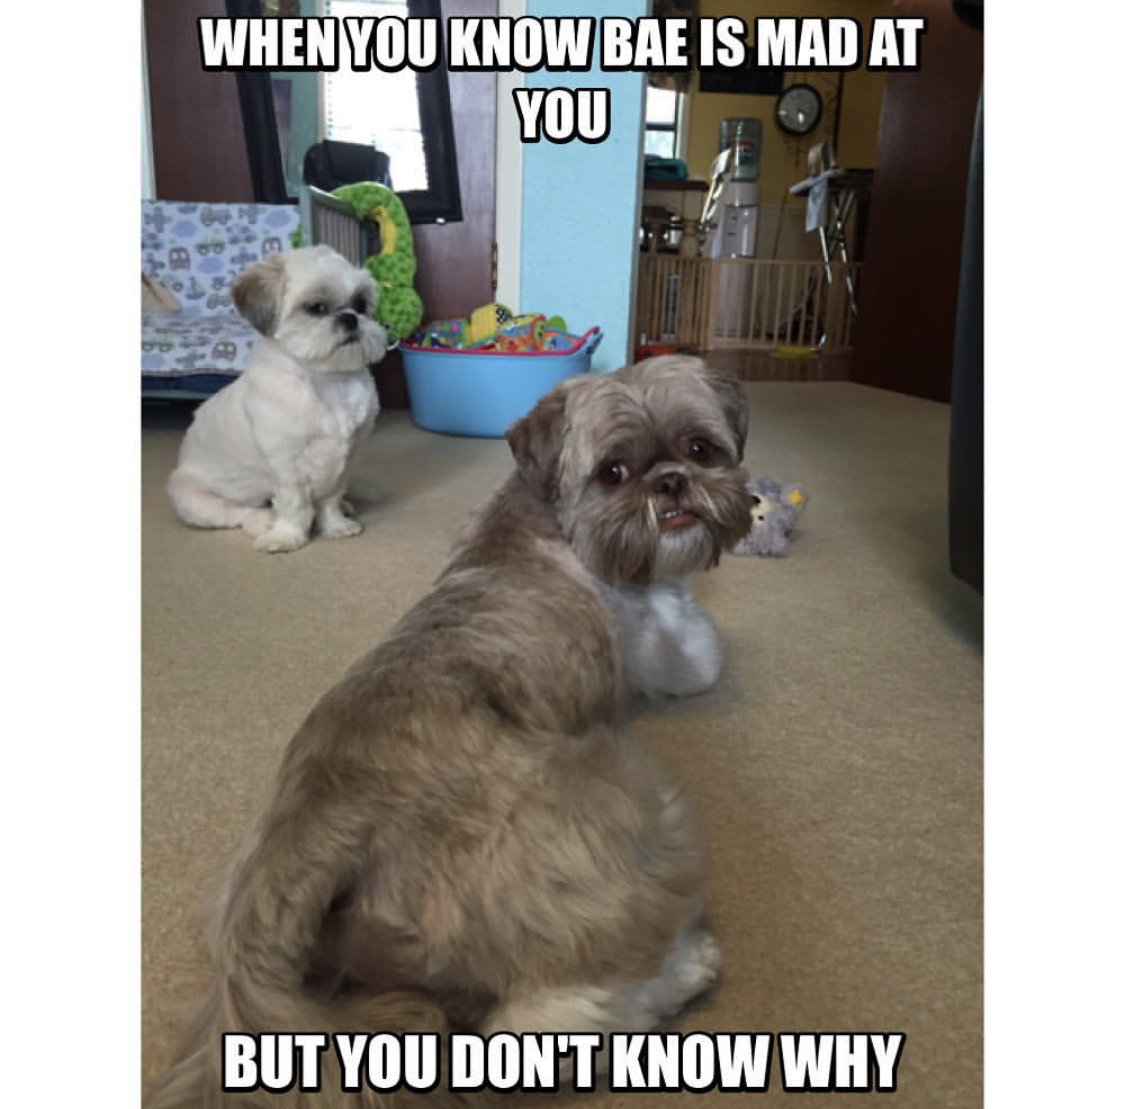 Shih Tzu lying down on the floor while looking back with its angry face while another Shih Tzu is sitting behind frowning photo with a text 